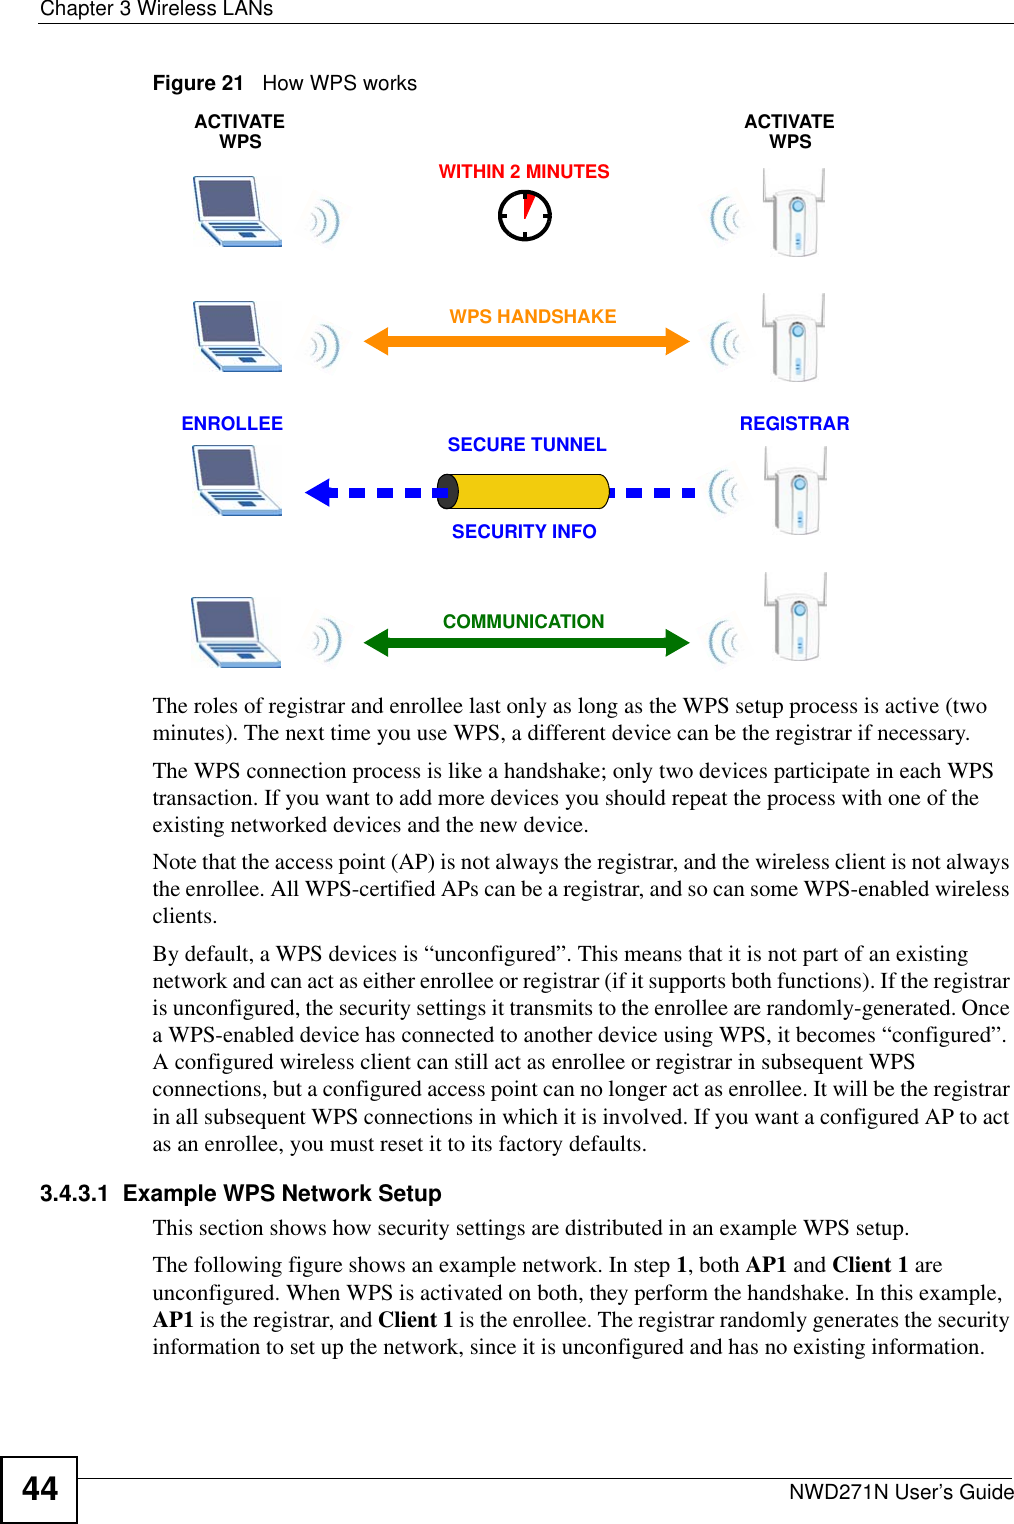 Chapter 3 Wireless LANsNWD271N User’s Guide44Figure 21   How WPS worksThe roles of registrar and enrollee last only as long as the WPS setup process is active (two minutes). The next time you use WPS, a different device can be the registrar if necessary.The WPS connection process is like a handshake; only two devices participate in each WPS transaction. If you want to add more devices you should repeat the process with one of the existing networked devices and the new device.Note that the access point (AP) is not always the registrar, and the wireless client is not always the enrollee. All WPS-certified APs can be a registrar, and so can some WPS-enabled wireless clients.By default, a WPS devices is “unconfigured”. This means that it is not part of an existing network and can act as either enrollee or registrar (if it supports both functions). If the registrar is unconfigured, the security settings it transmits to the enrollee are randomly-generated. Once a WPS-enabled device has connected to another device using WPS, it becomes “configured”. A configured wireless client can still act as enrollee or registrar in subsequent WPS connections, but a configured access point can no longer act as enrollee. It will be the registrar in all subsequent WPS connections in which it is involved. If you want a configured AP to act as an enrollee, you must reset it to its factory defaults.3.4.3.1  Example WPS Network SetupThis section shows how security settings are distributed in an example WPS setup.The following figure shows an example network. In step 1, both AP1 and Client 1 are unconfigured. When WPS is activated on both, they perform the handshake. In this example, AP1 is the registrar, and Client 1 is the enrollee. The registrar randomly generates the security information to set up the network, since it is unconfigured and has no existing information.SECURE TUNNELSECURITY INFOWITHIN 2 MINUTESCOMMUNICATIONACTIVATEWPSACTIVATEWPSWPS HANDSHAKEREGISTRARENROLLEE